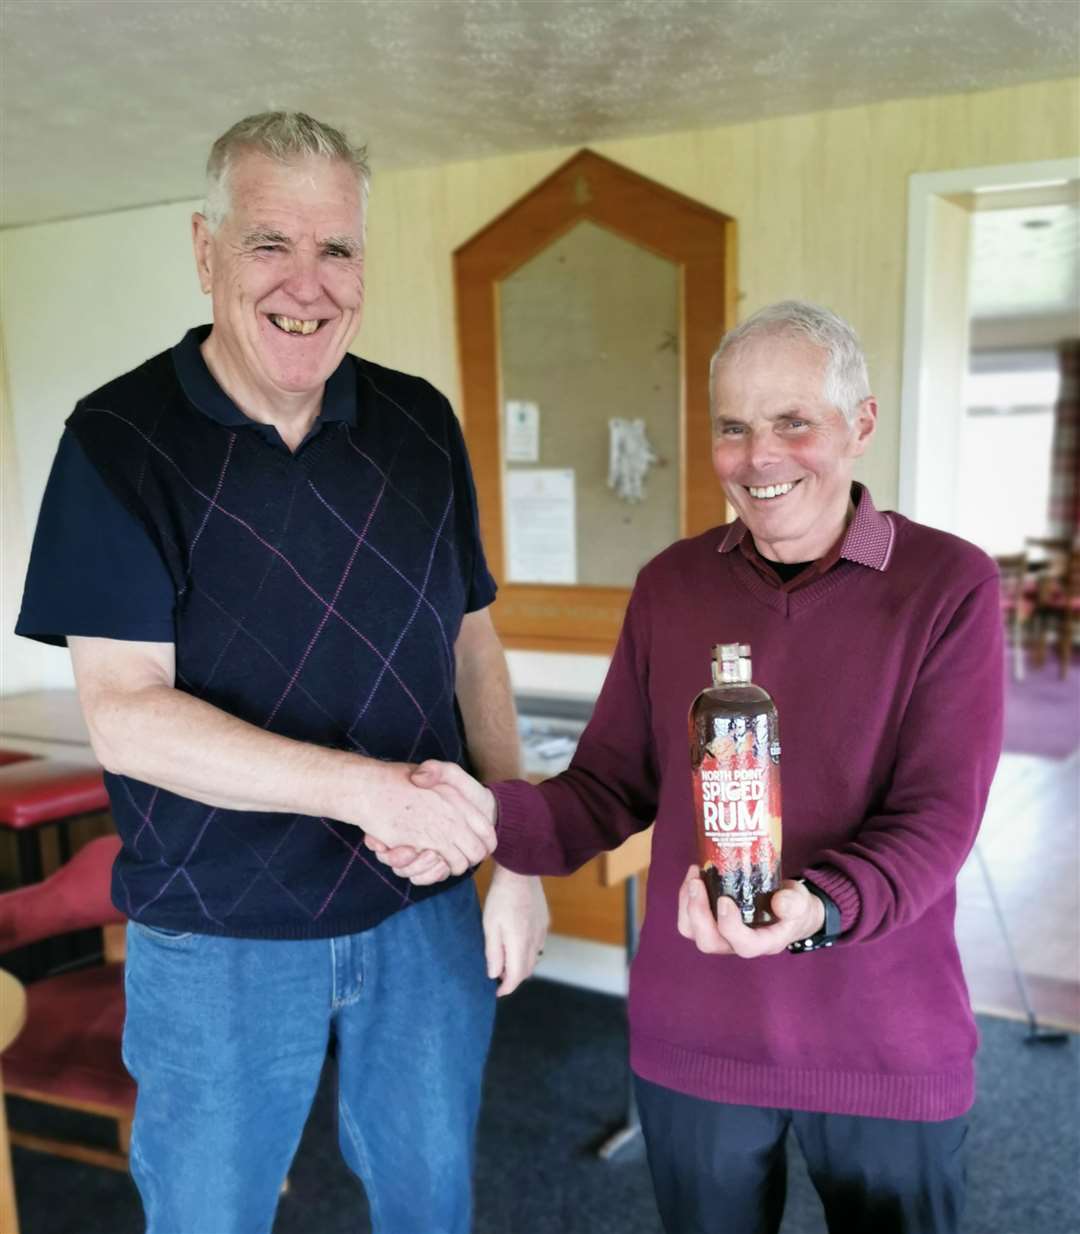 Alex Anderson (left) receiving a bottle of North Point spiced rum from Sandy Chisholm after winning the nearest-the-pin prize during the latest round of the Senior Stableford competition at Reay.